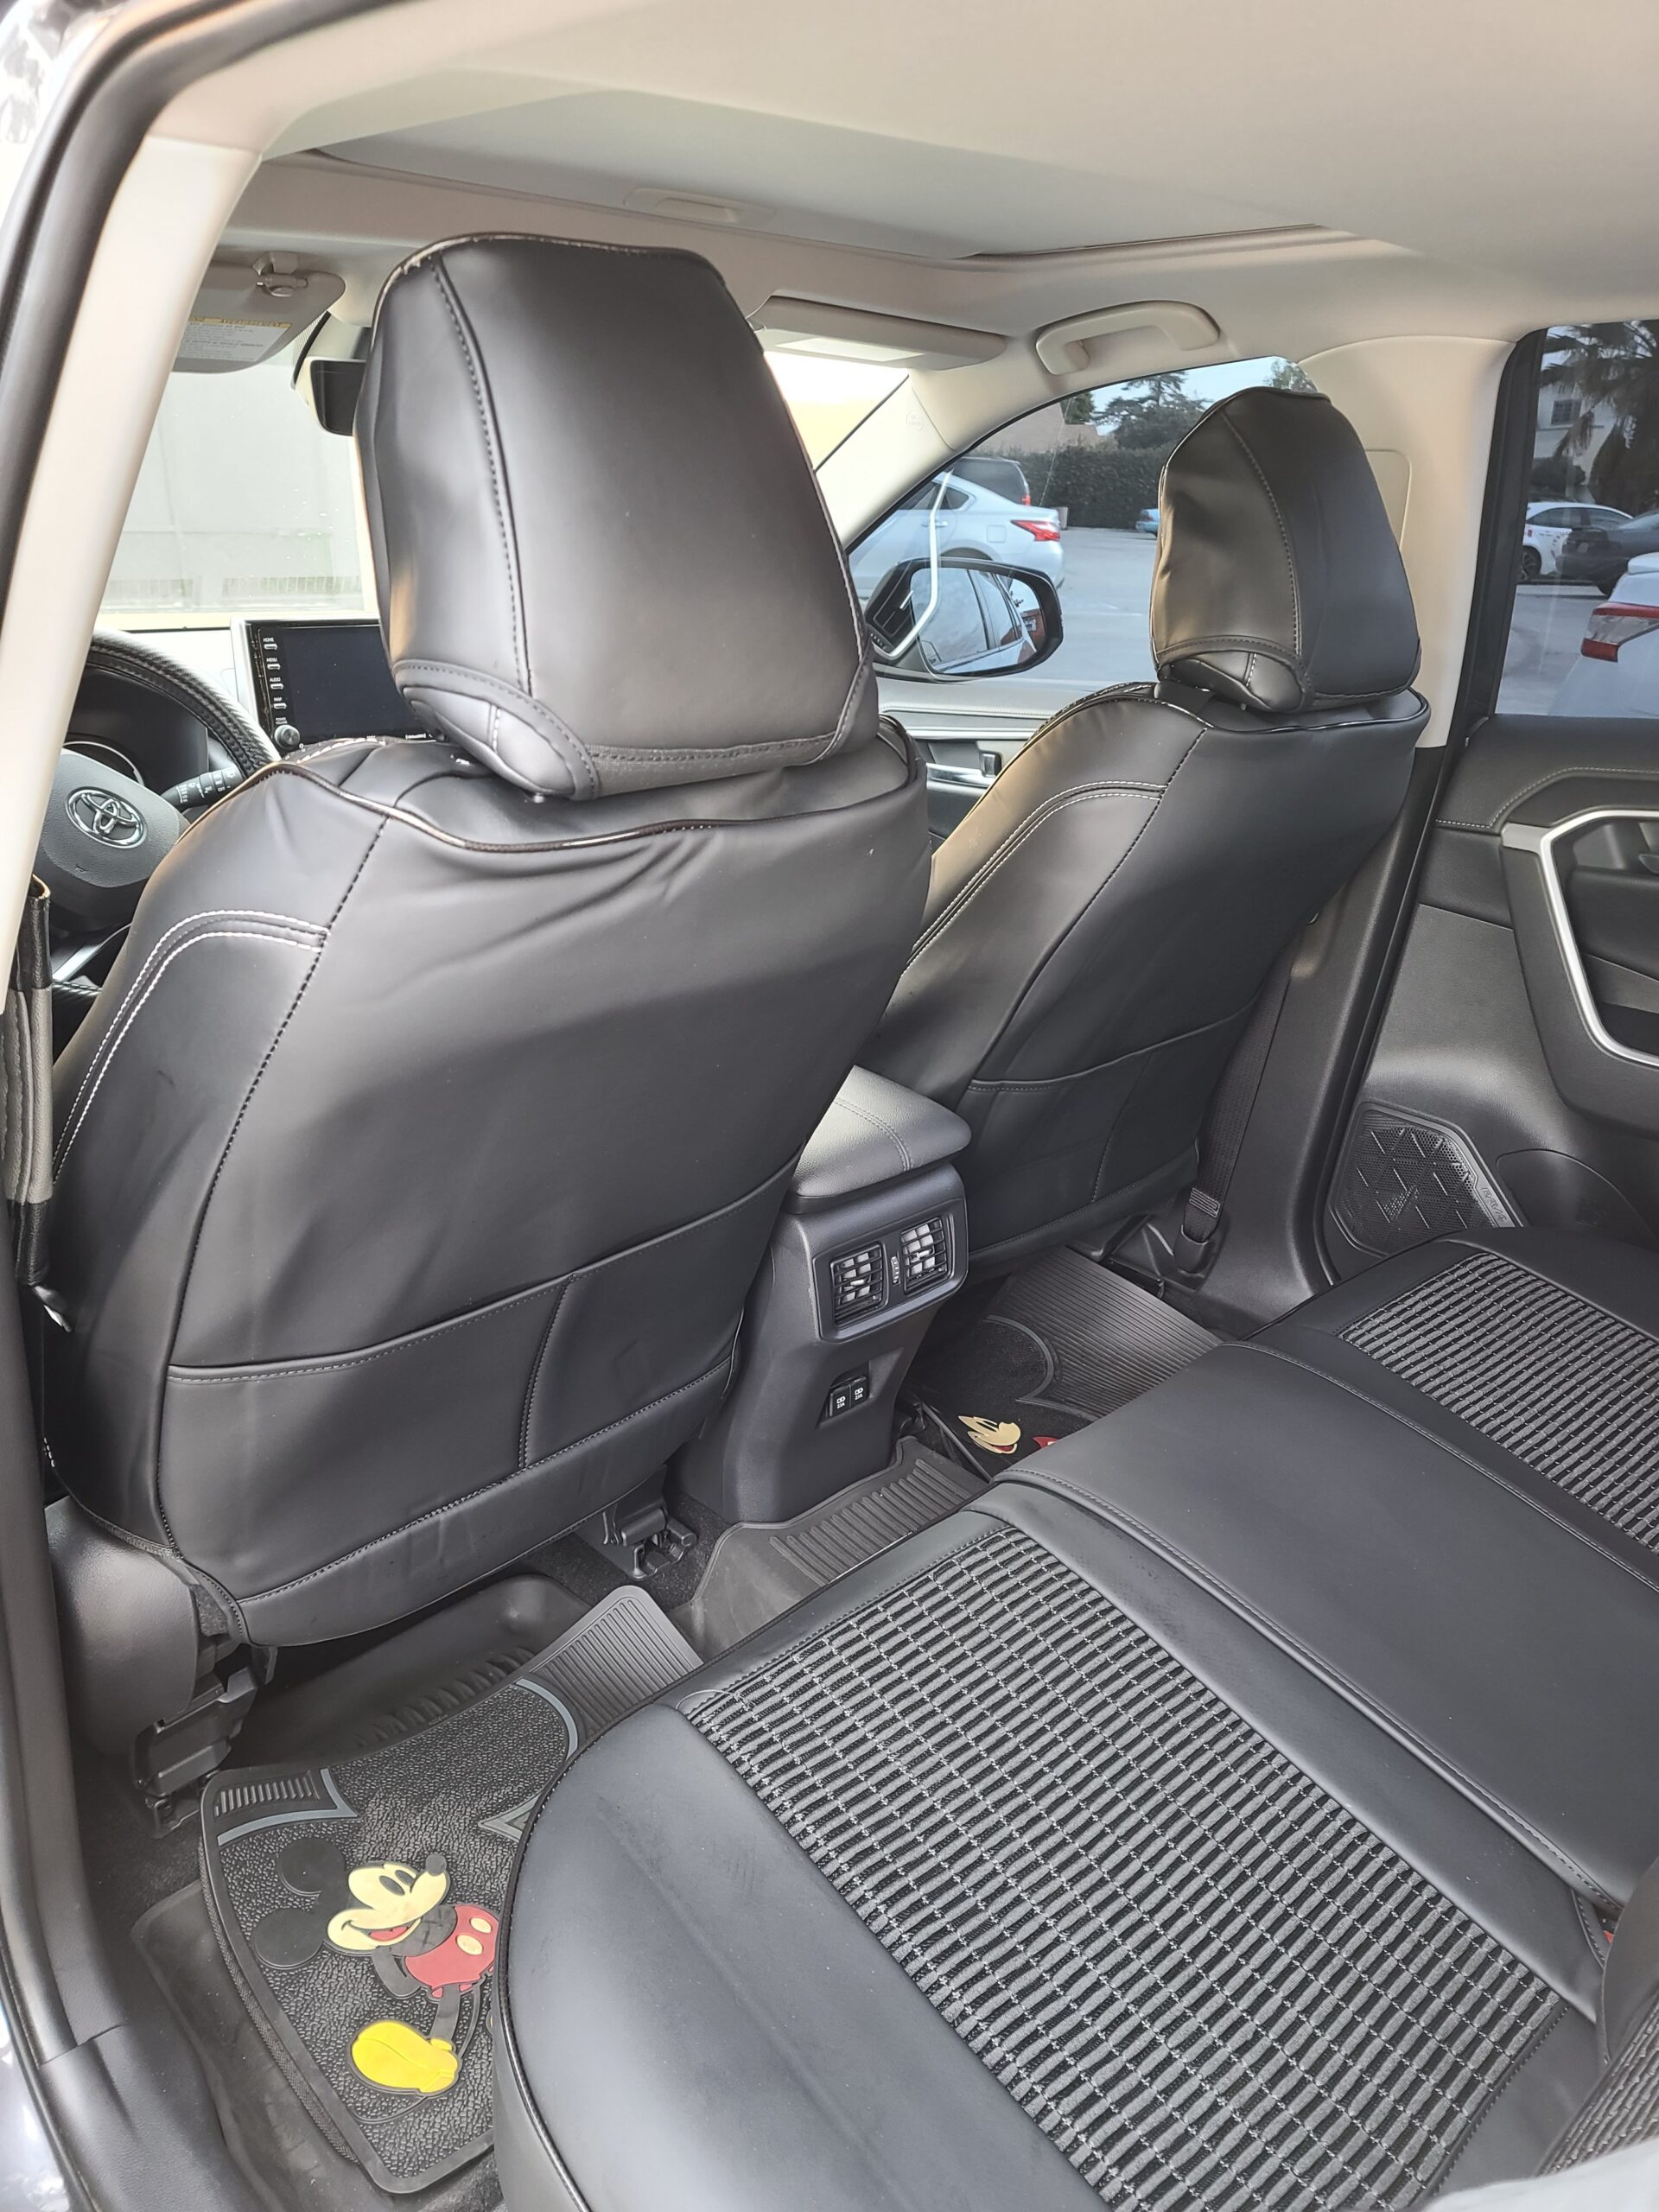 2021 Toyota Rav4 Seat Cover Installed – Car Seat Cover and Custom Car